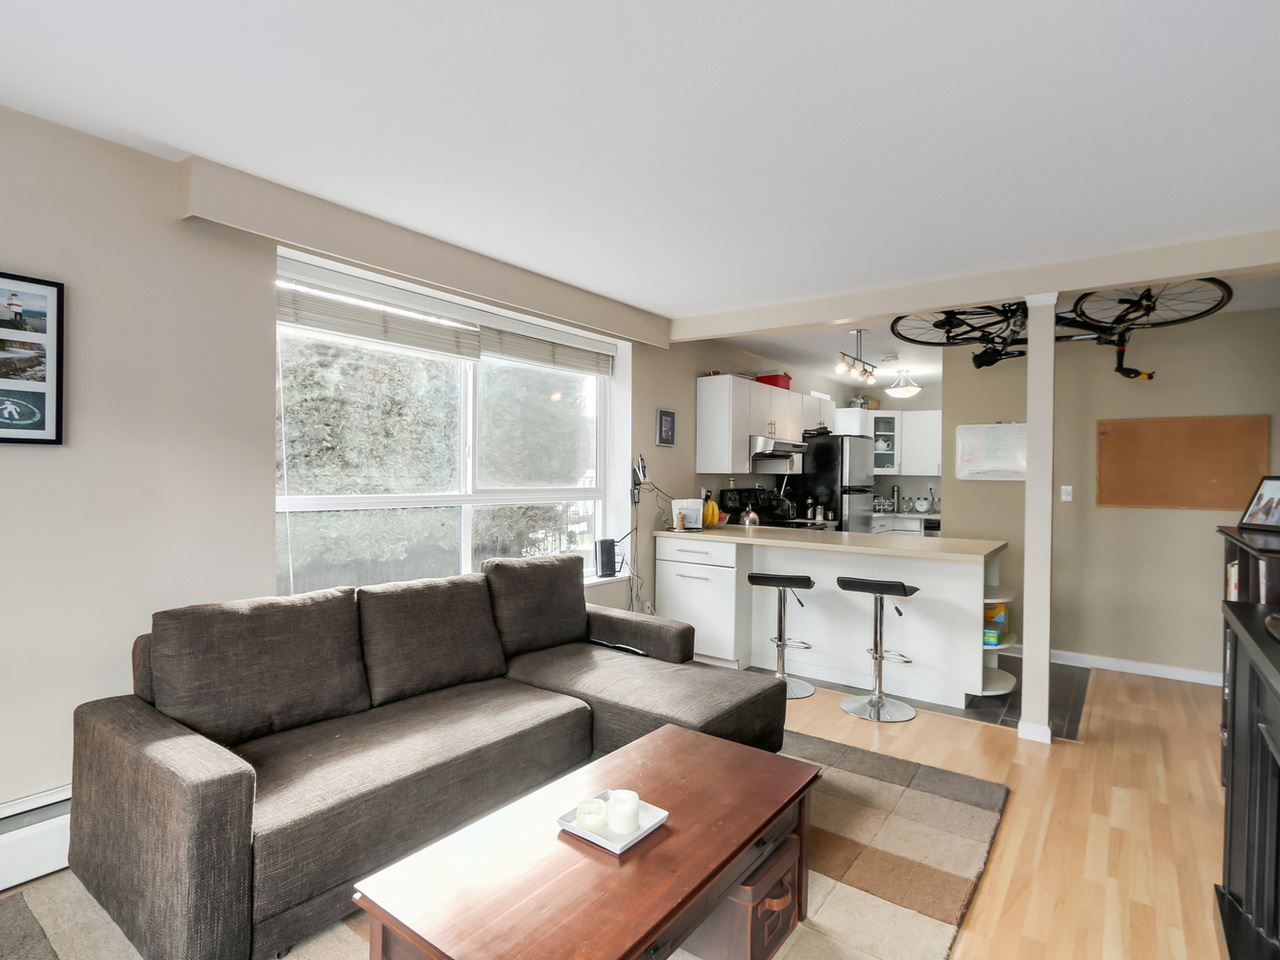 Main Photo: 103 8680 FREMLIN STREET in Vancouver: Marpole Condo for sale (Vancouver West)  : MLS®# R2050051